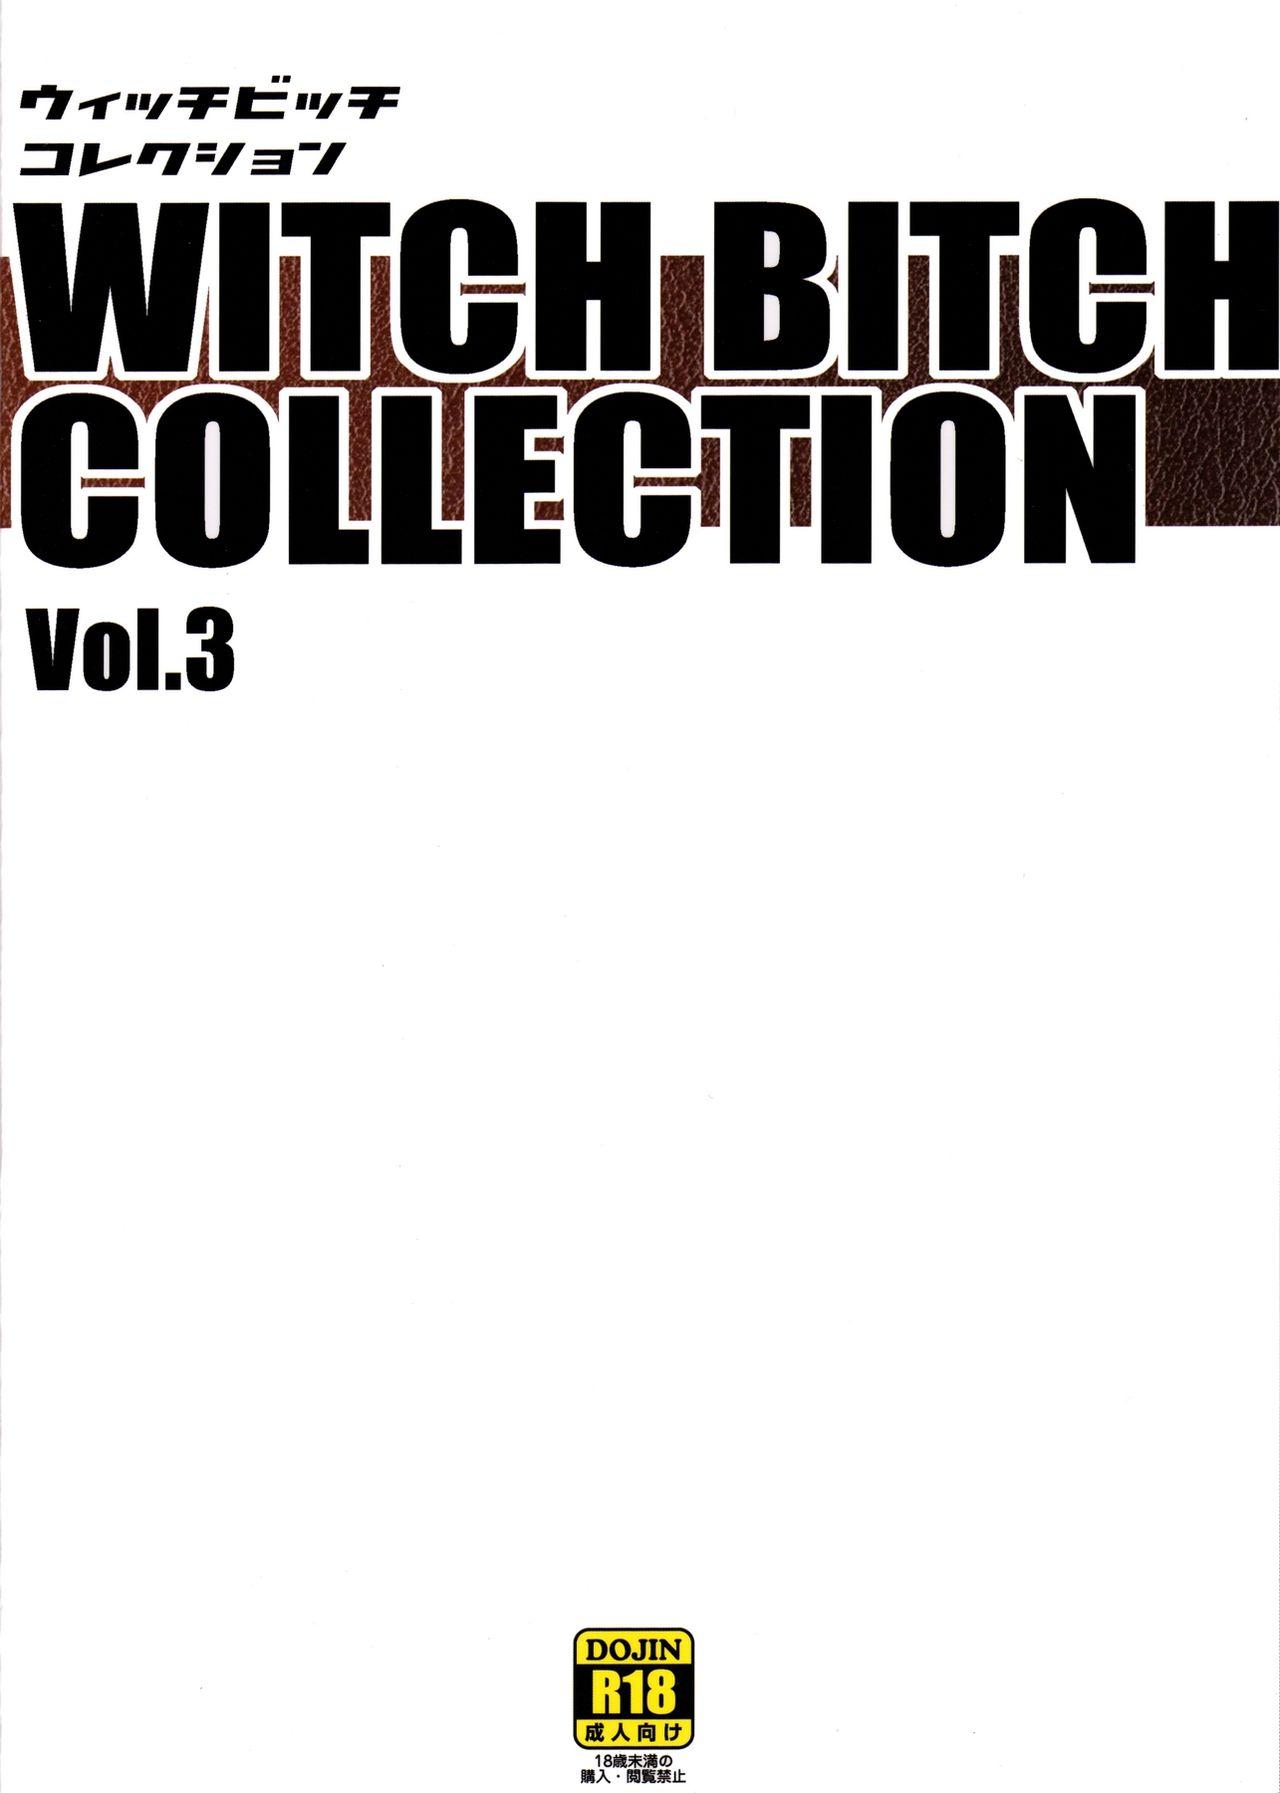 Handsome Witch Bitch Collection Vol. 3 - Fairy tail Hermana - Page 51